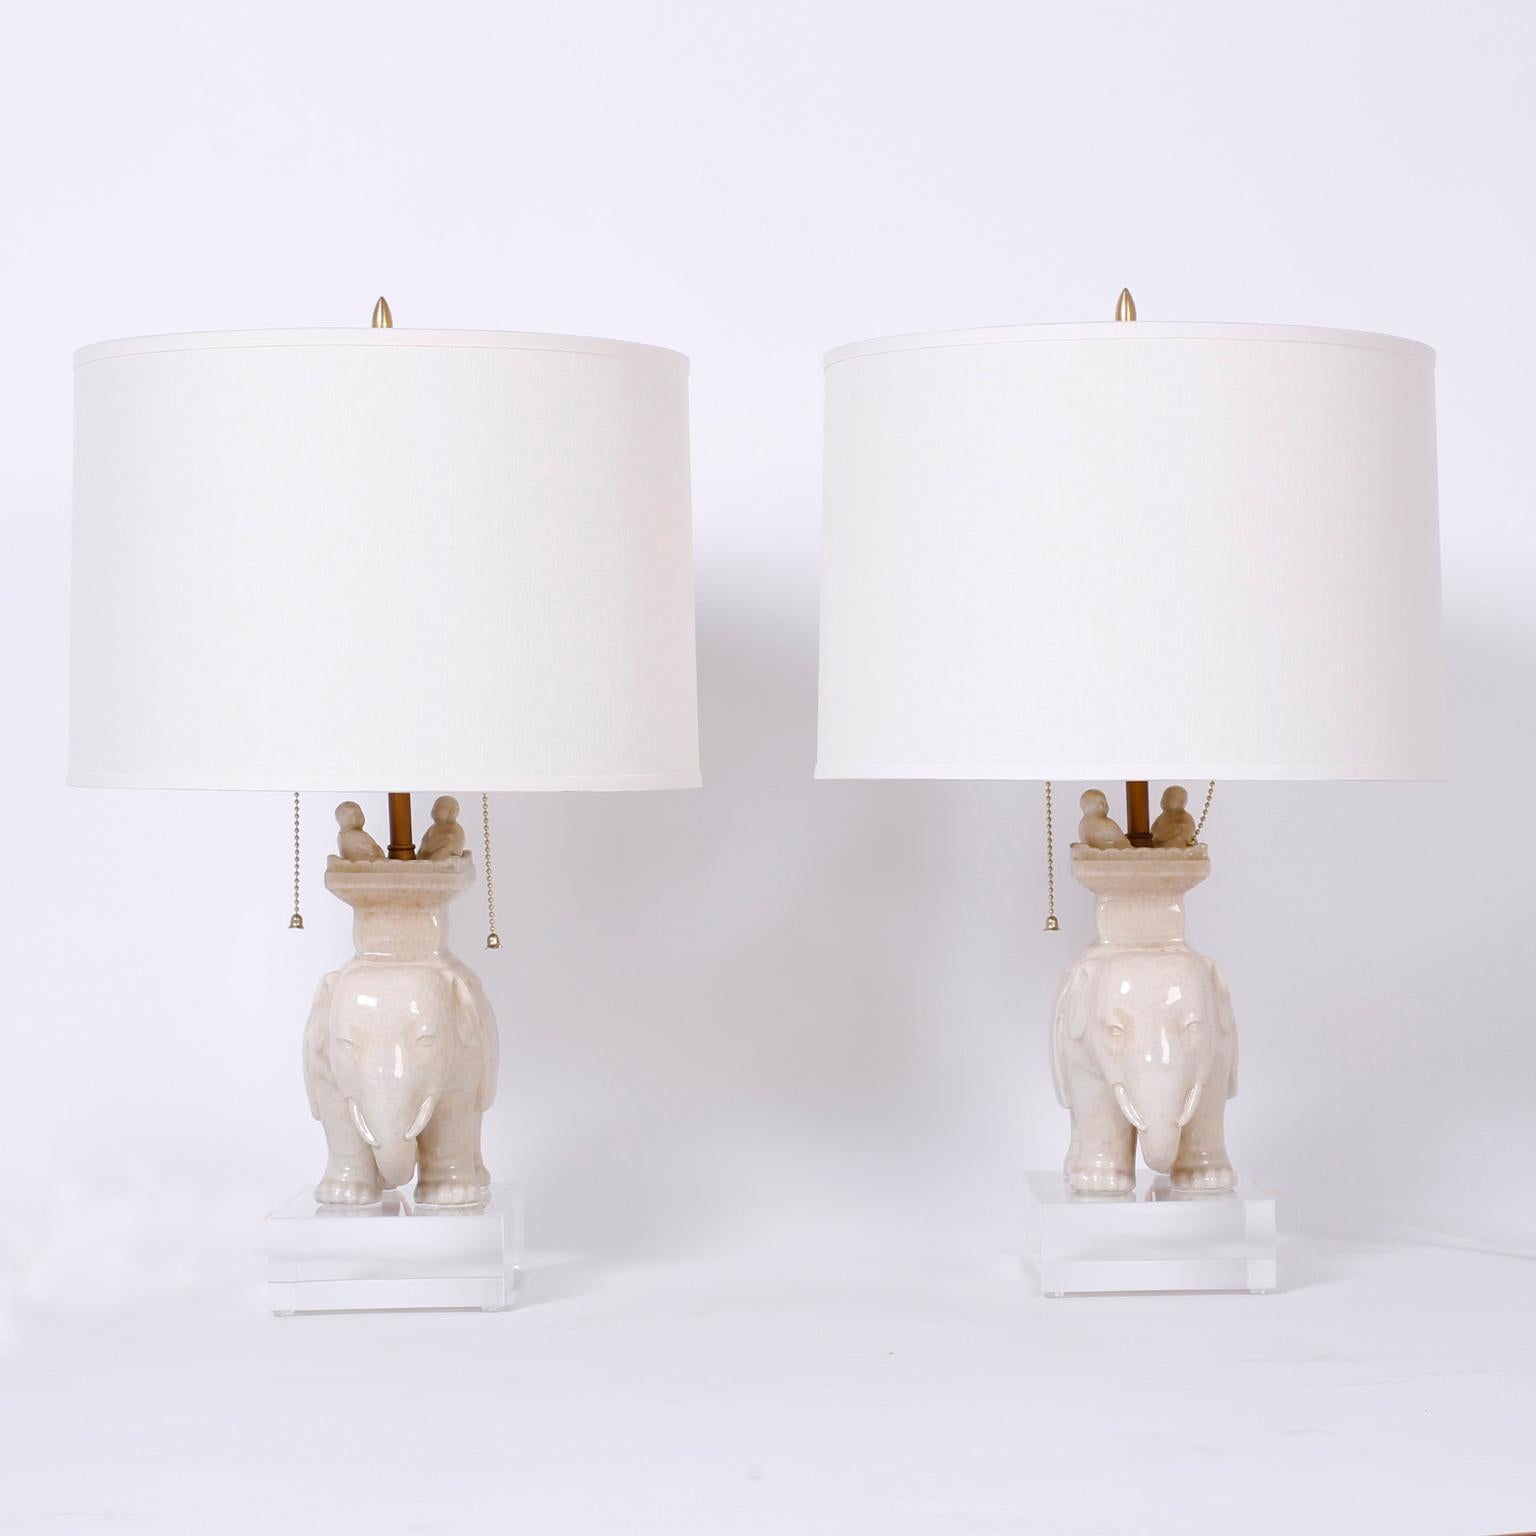 Intriguing pair of midcentury porcelain elephant table lamps with a cream color celadon crackle glaze and presented on thick Lucite bases.